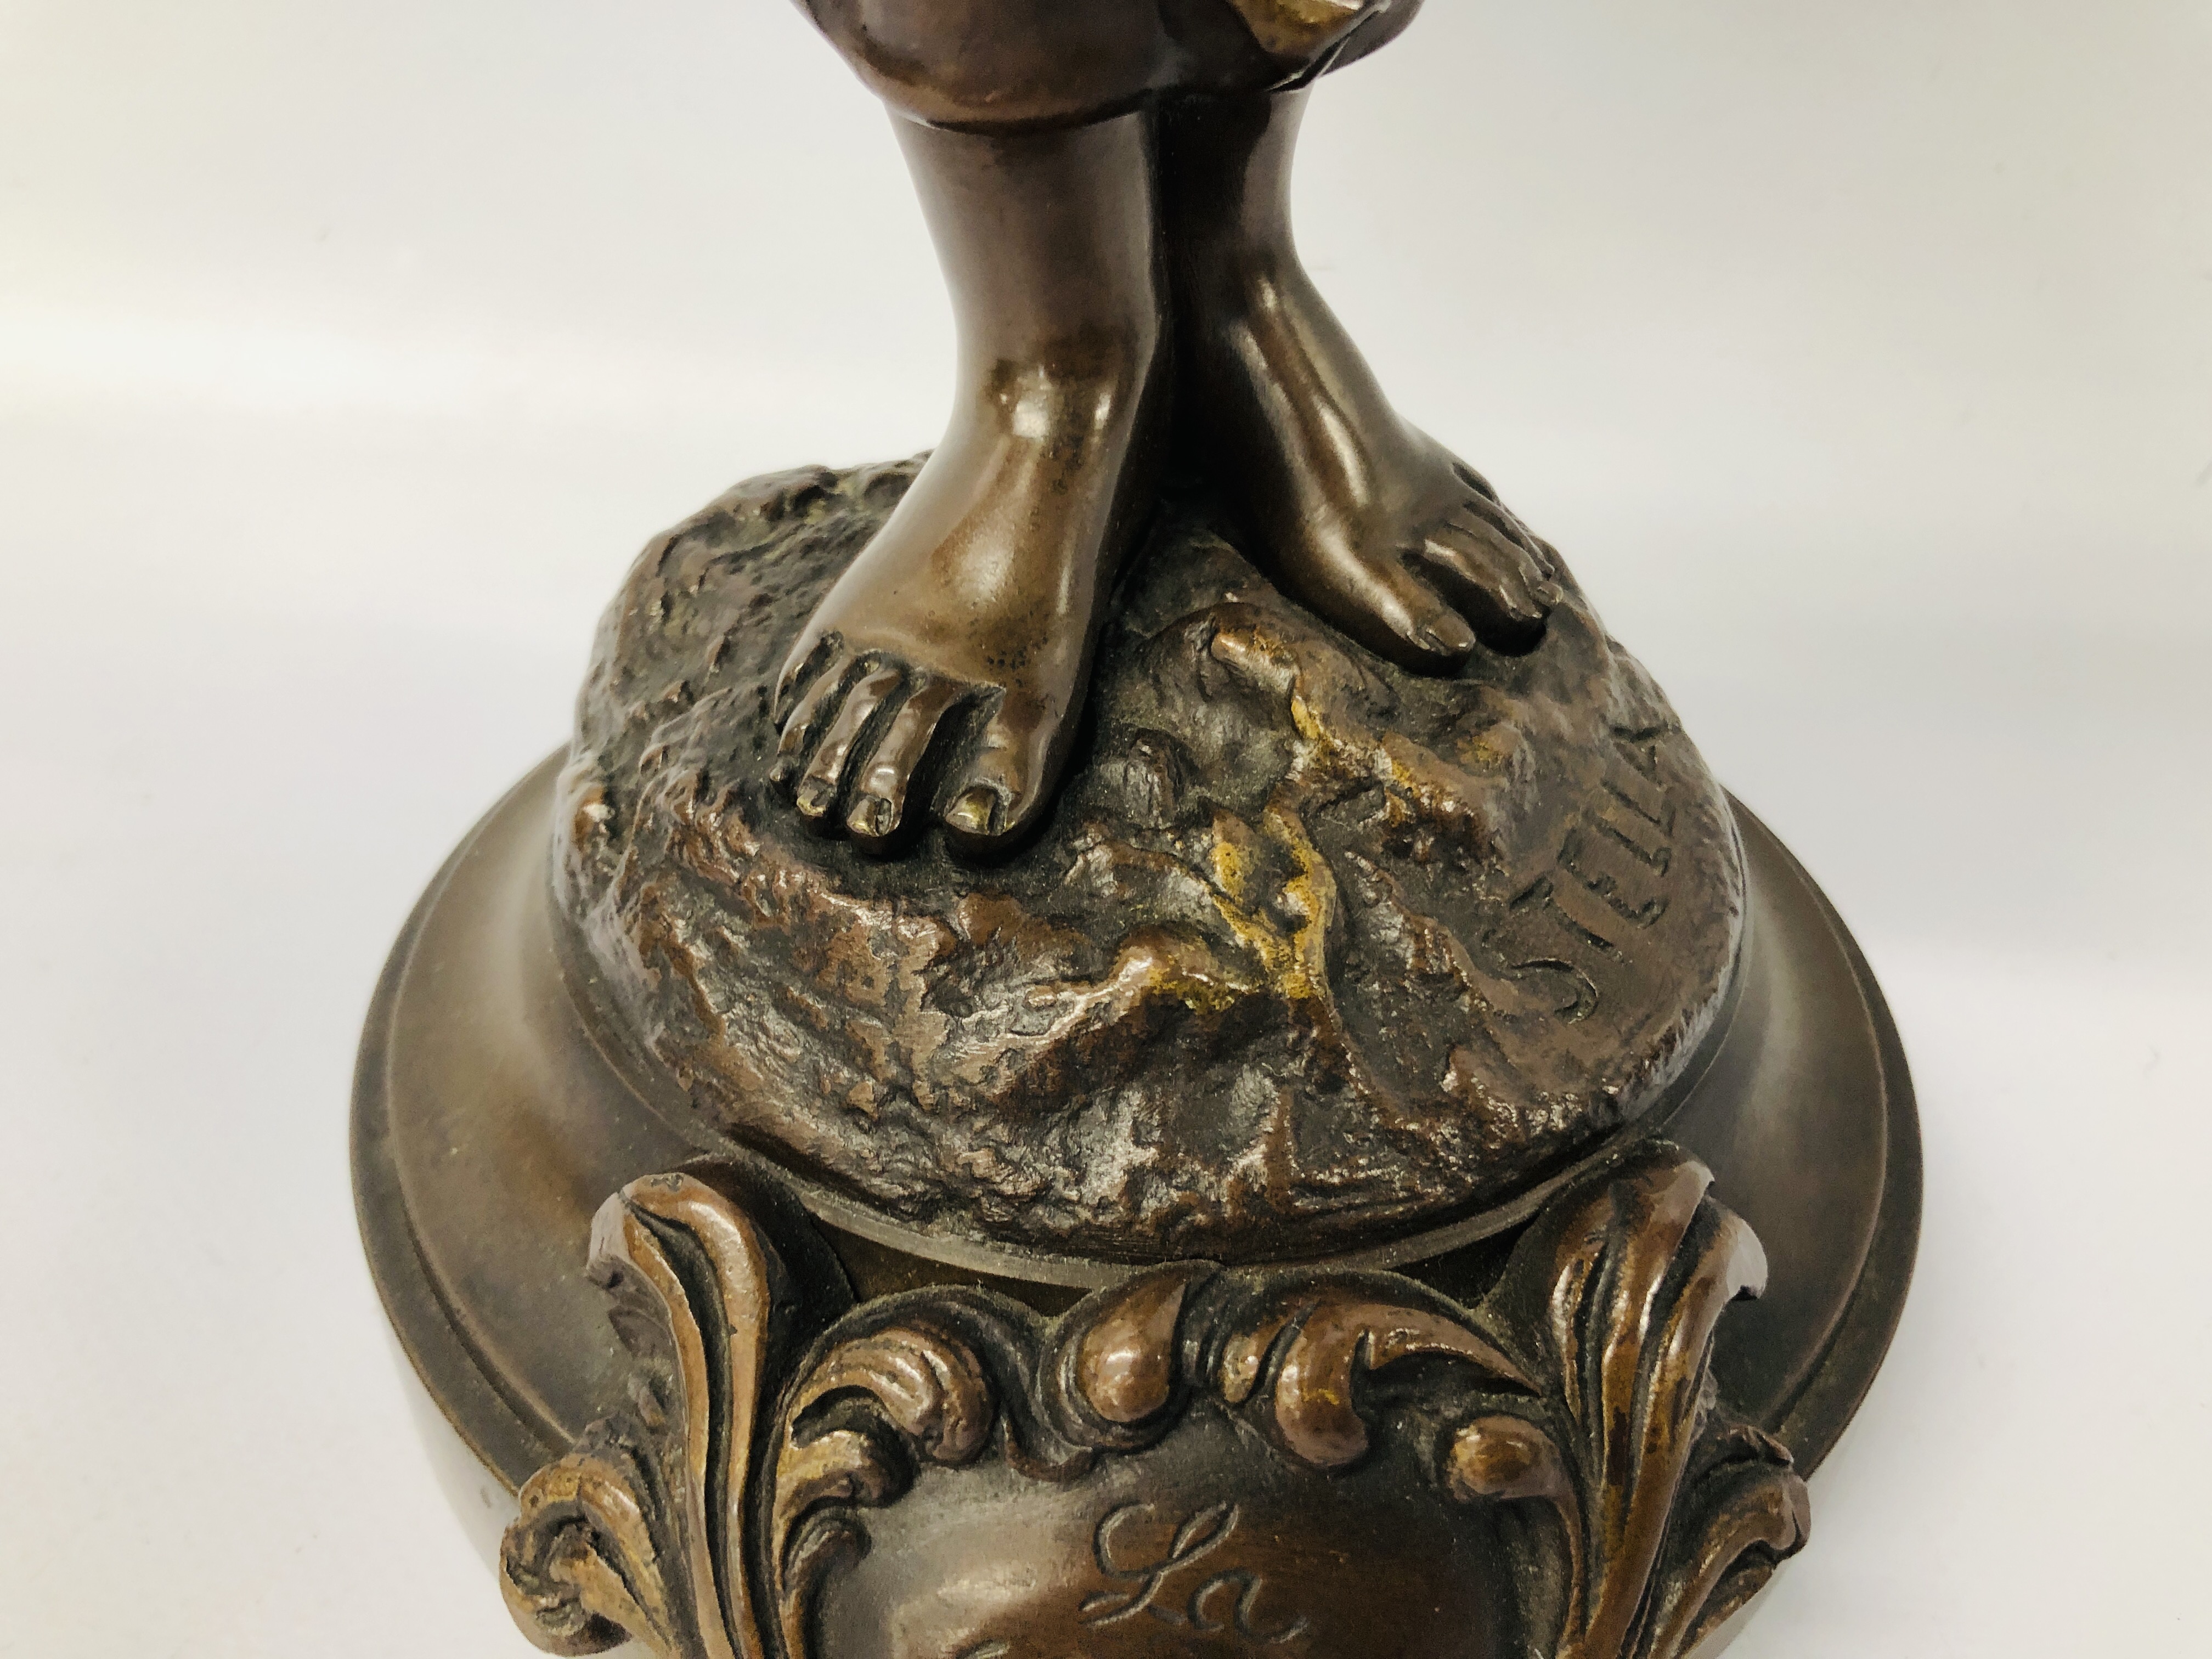 A FRENCH BRONZE OF A FEMALE LUTE PLAYER, THE BASE INSCRIBED "STELLA", - Image 3 of 10